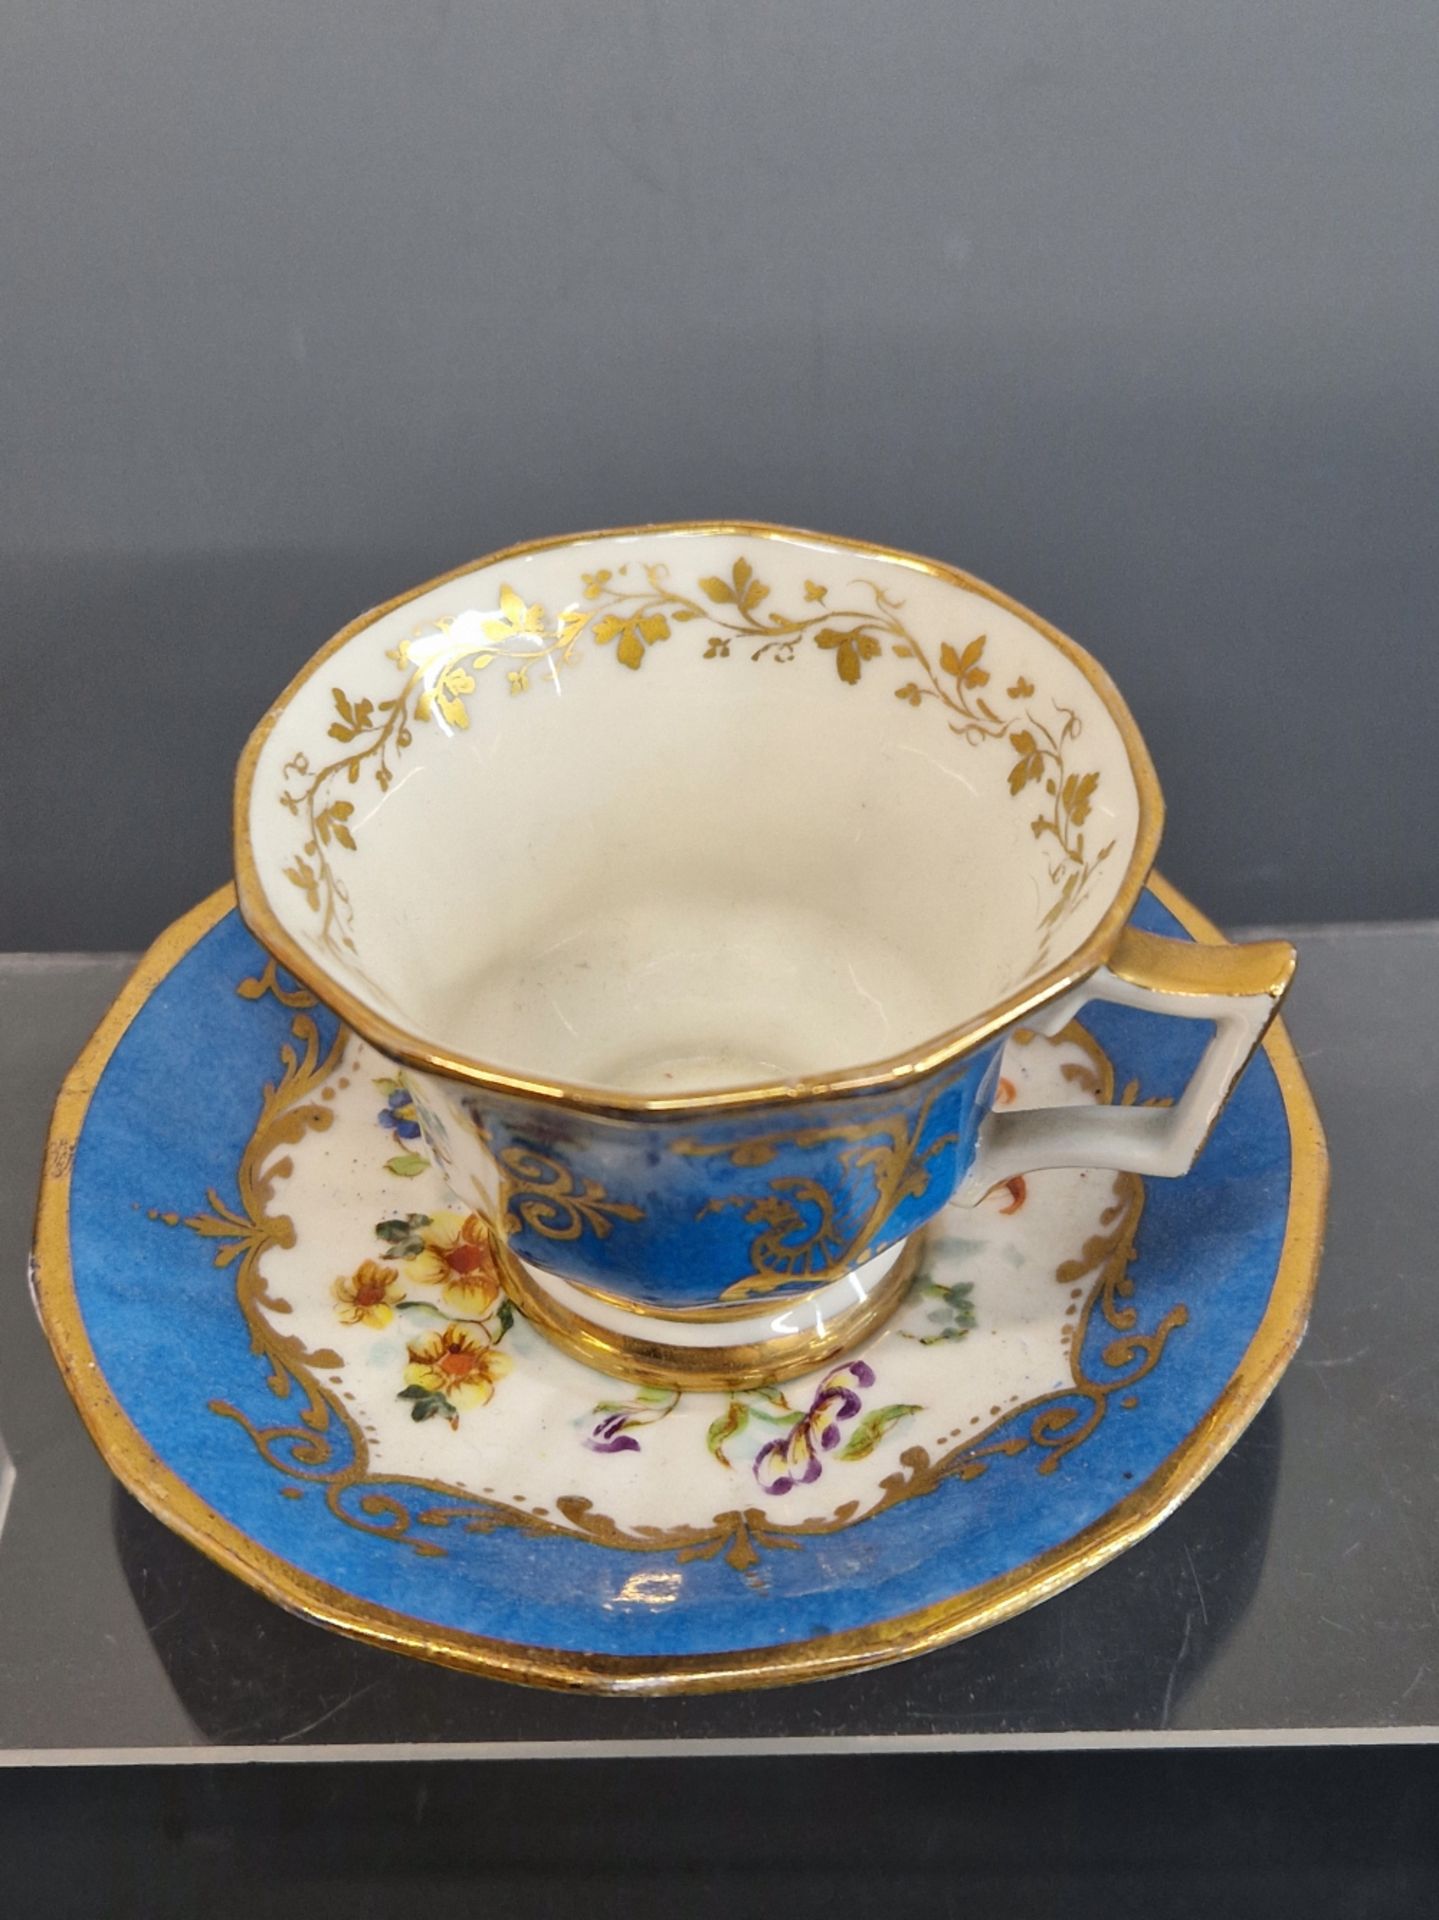 A PARIS PORCELAIN SEVRES STYLE BLUE GROUND FLOWER PAINTED TEA POT, COVER, CUP AND SAUCER - Image 8 of 12